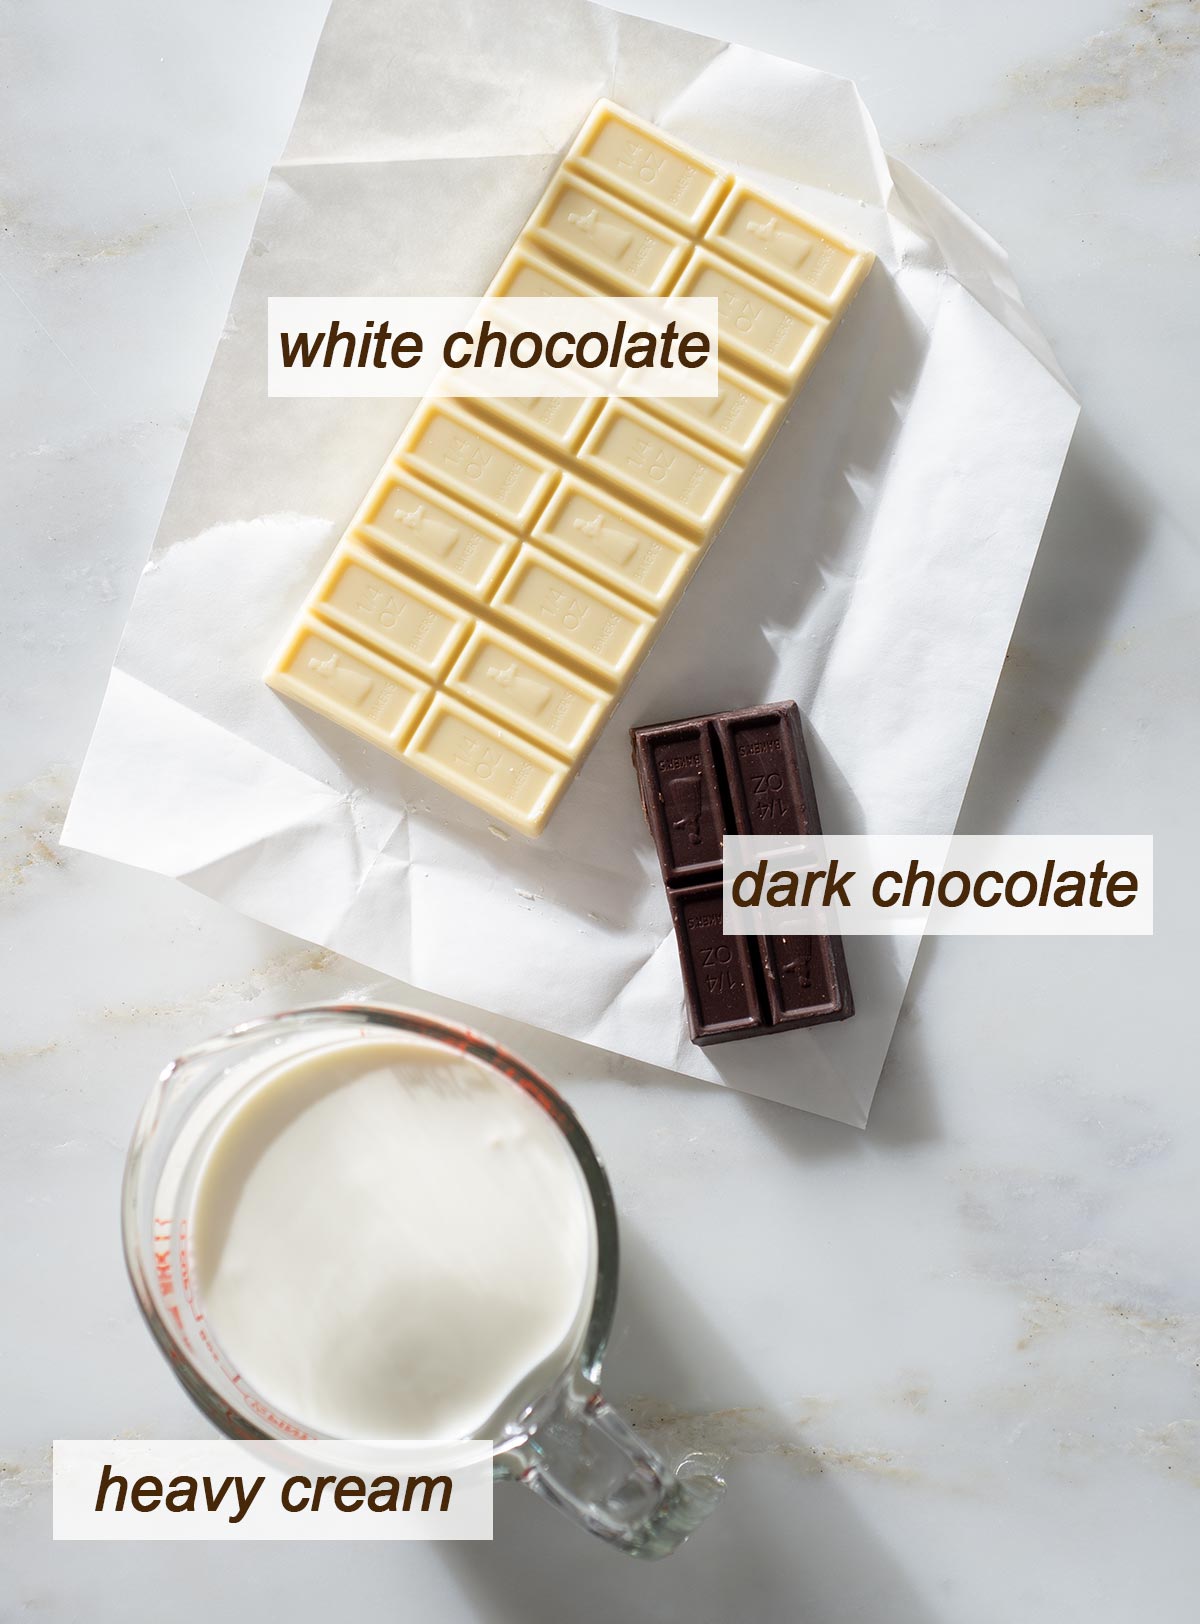 White chocolate, dark chocolate and a cup of heavy cream.